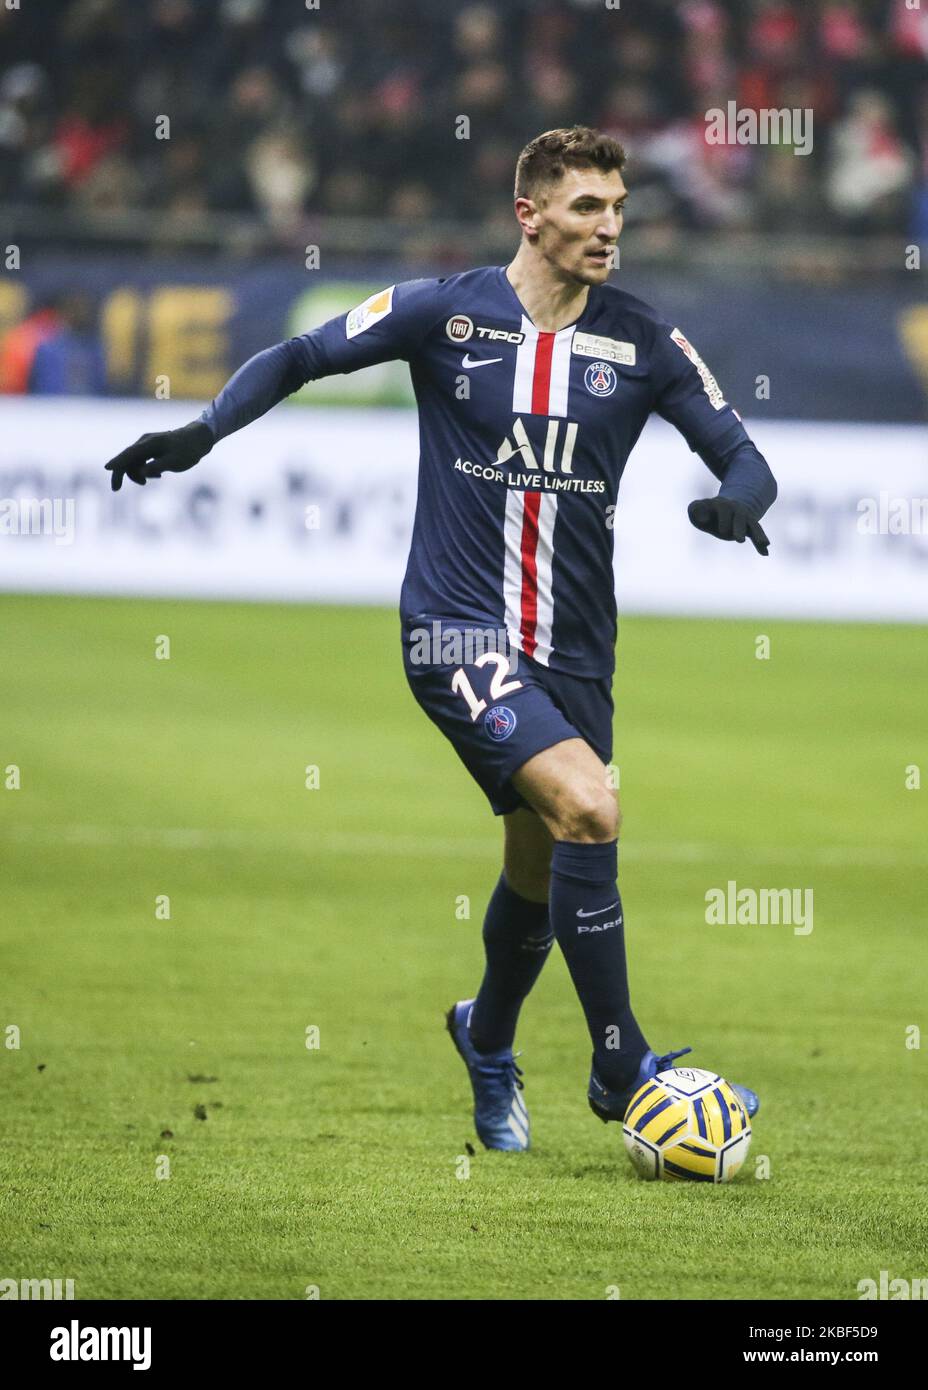 Thomas Meunier during the French League Cup semi-final football match between Stade de Reims and Paris Saint-Germain at the Auguste Delaune Stadium in Reims on January 22, 2020. (Photo by Elyxandro Cegarra/NurPhoto) Stock Photo